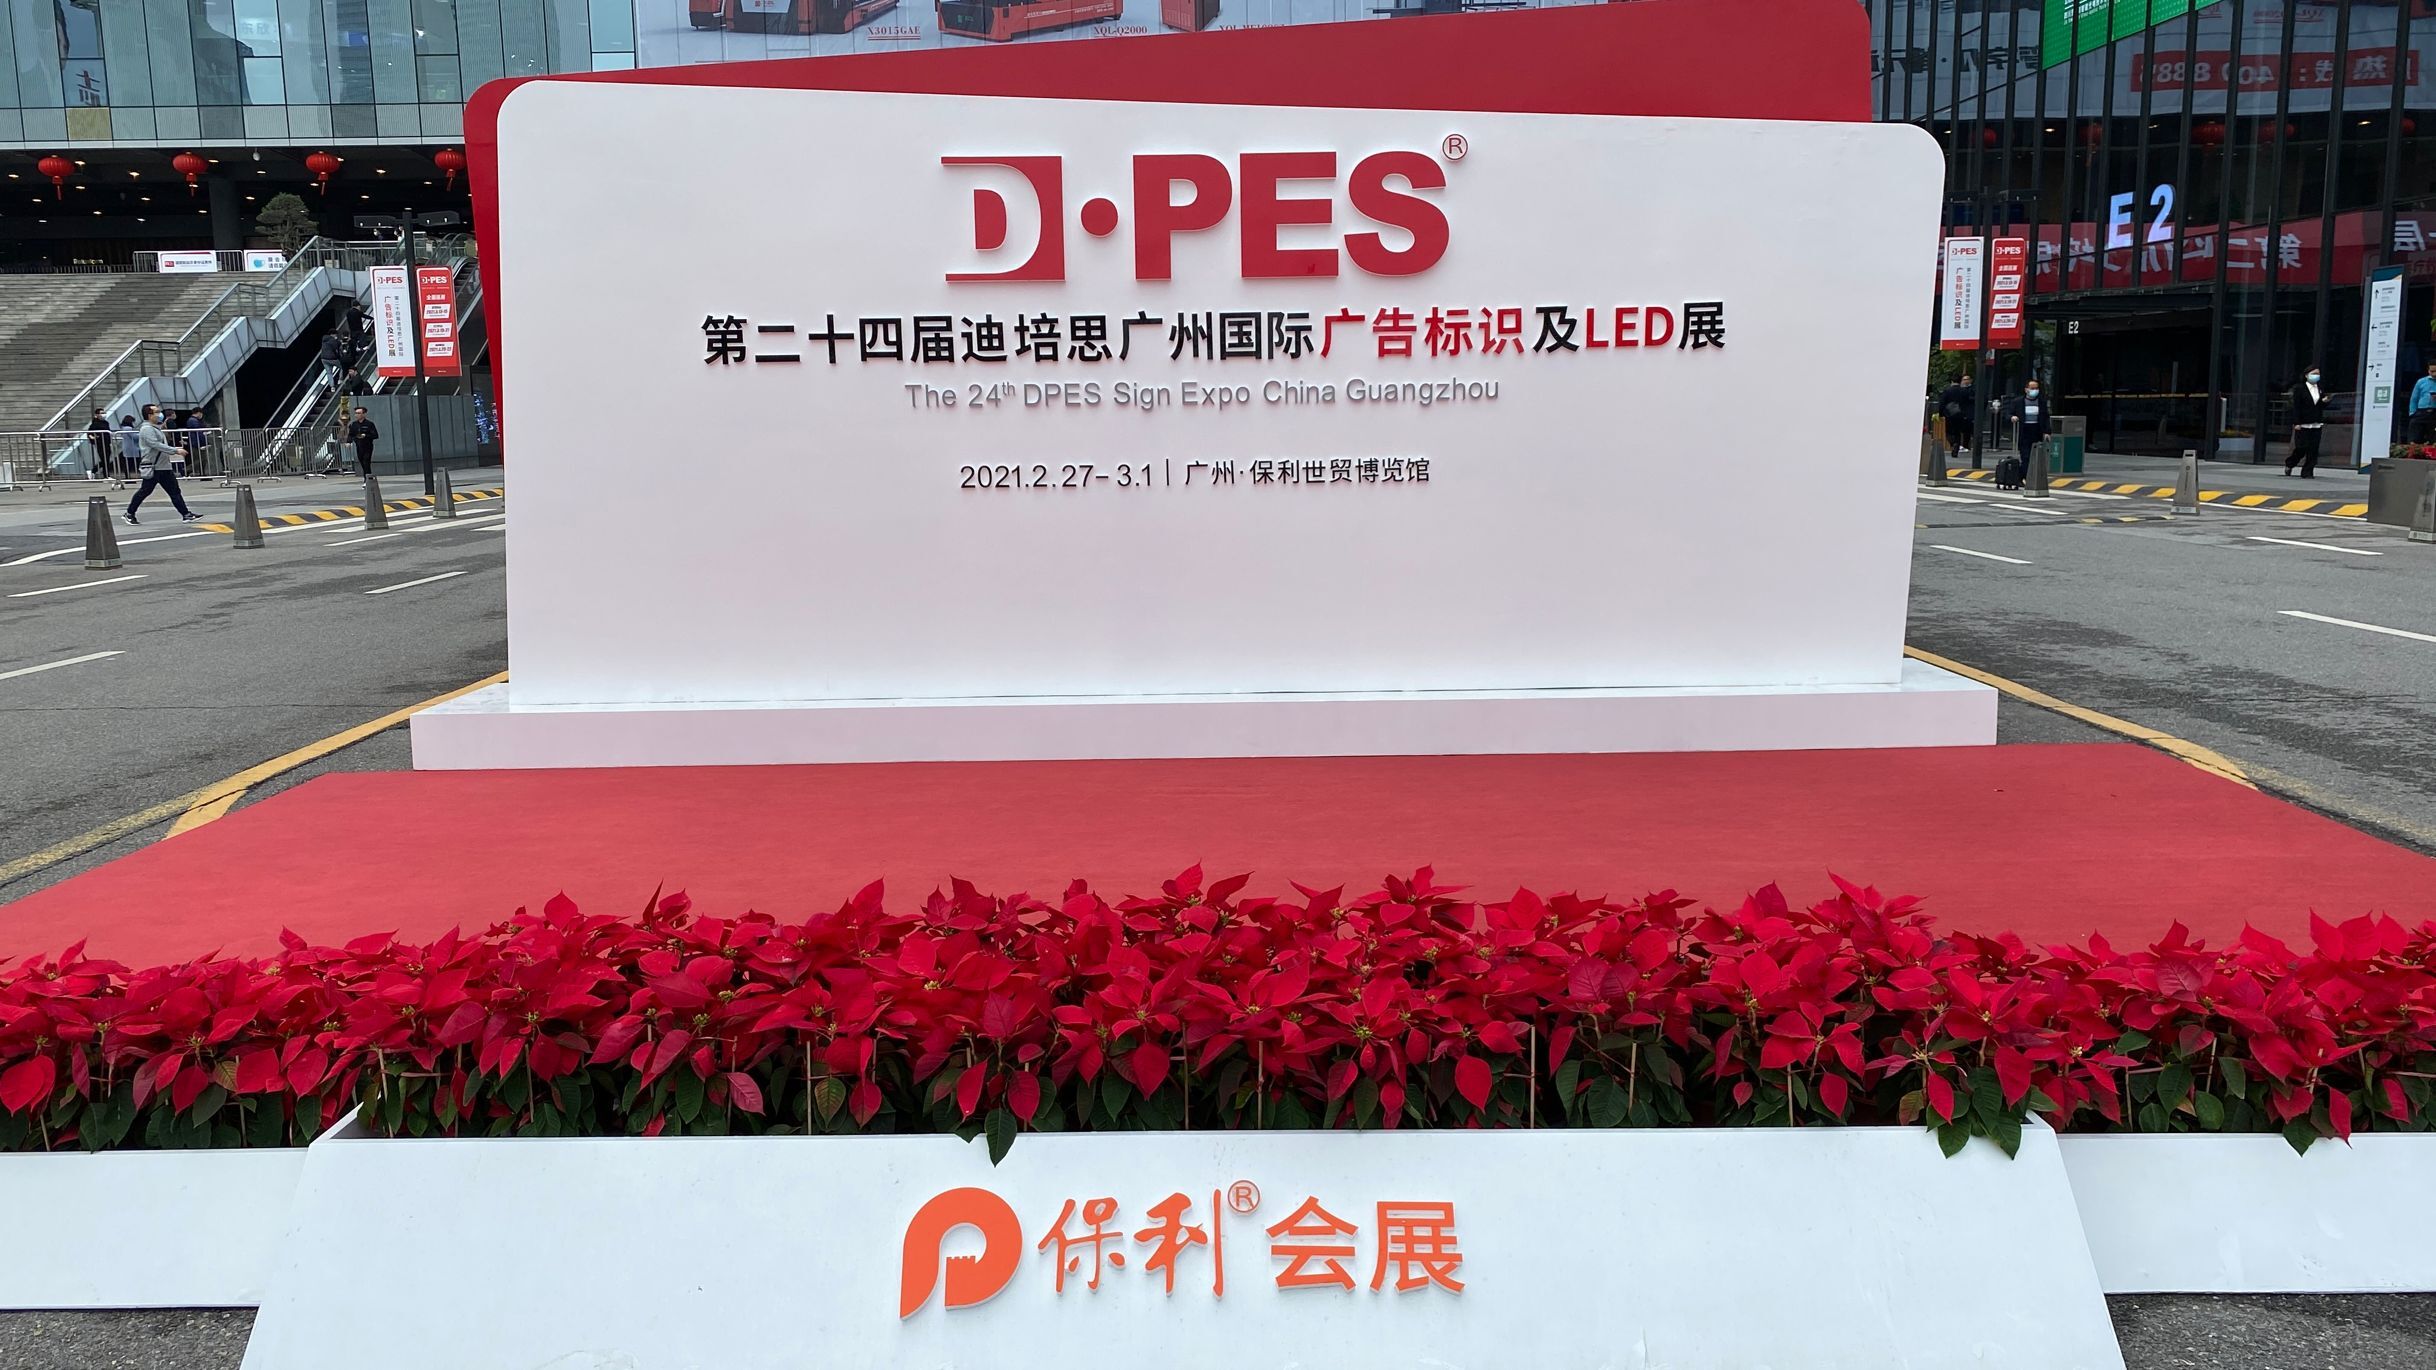 2021 DPES Sign Expo China Guangzhou Has Been Successfully Concluded